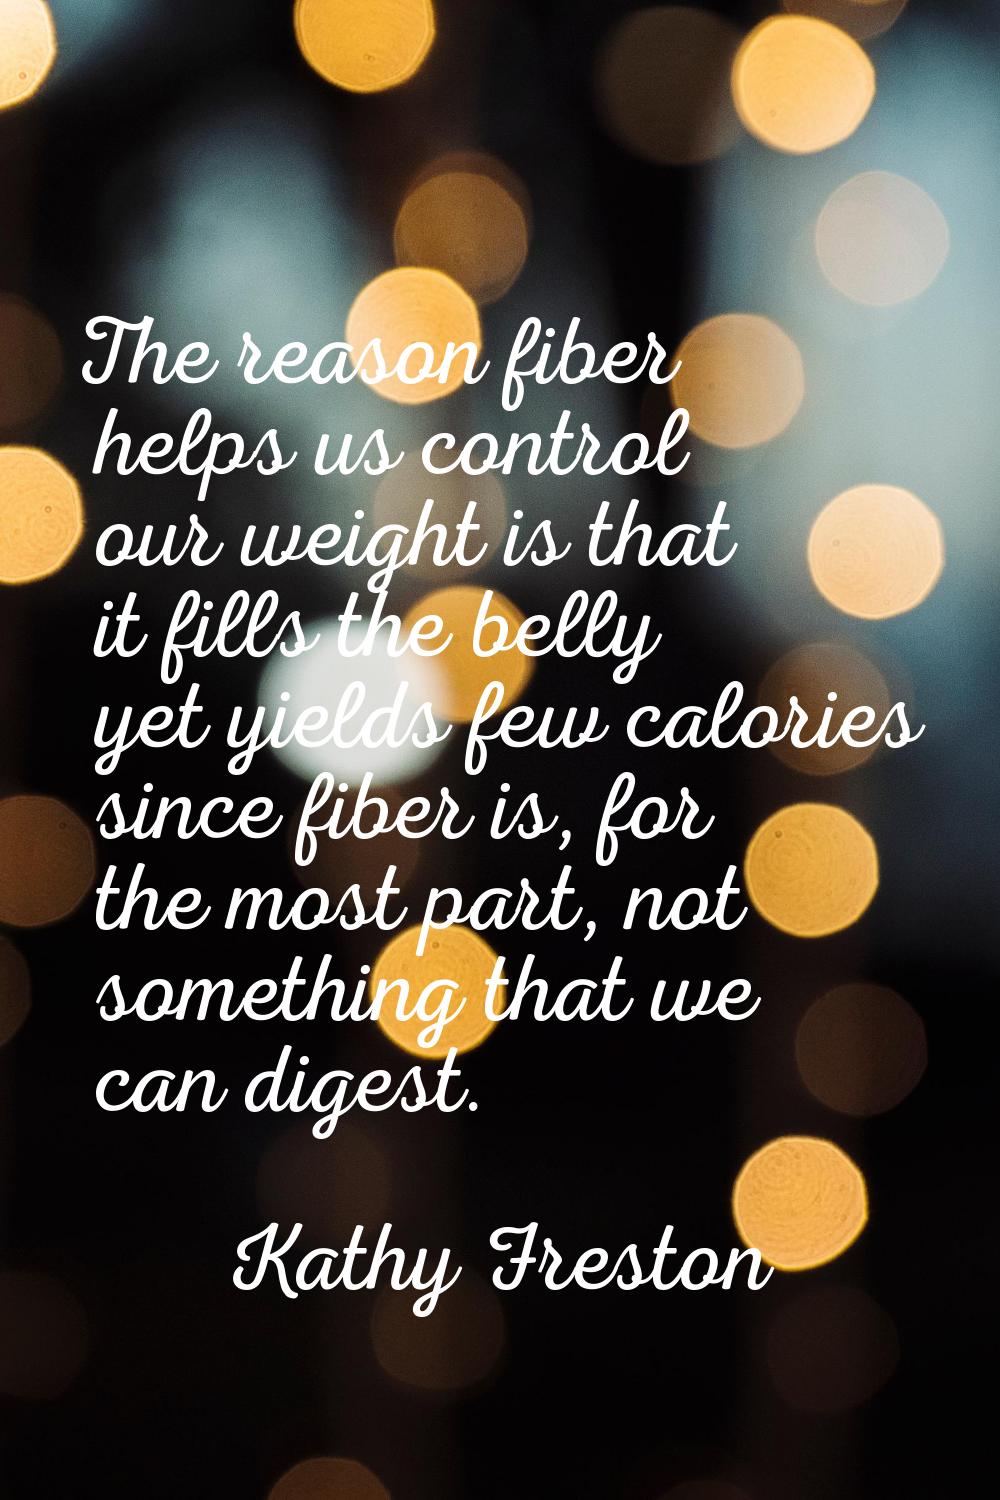 The reason fiber helps us control our weight is that it fills the belly yet yields few calories sin